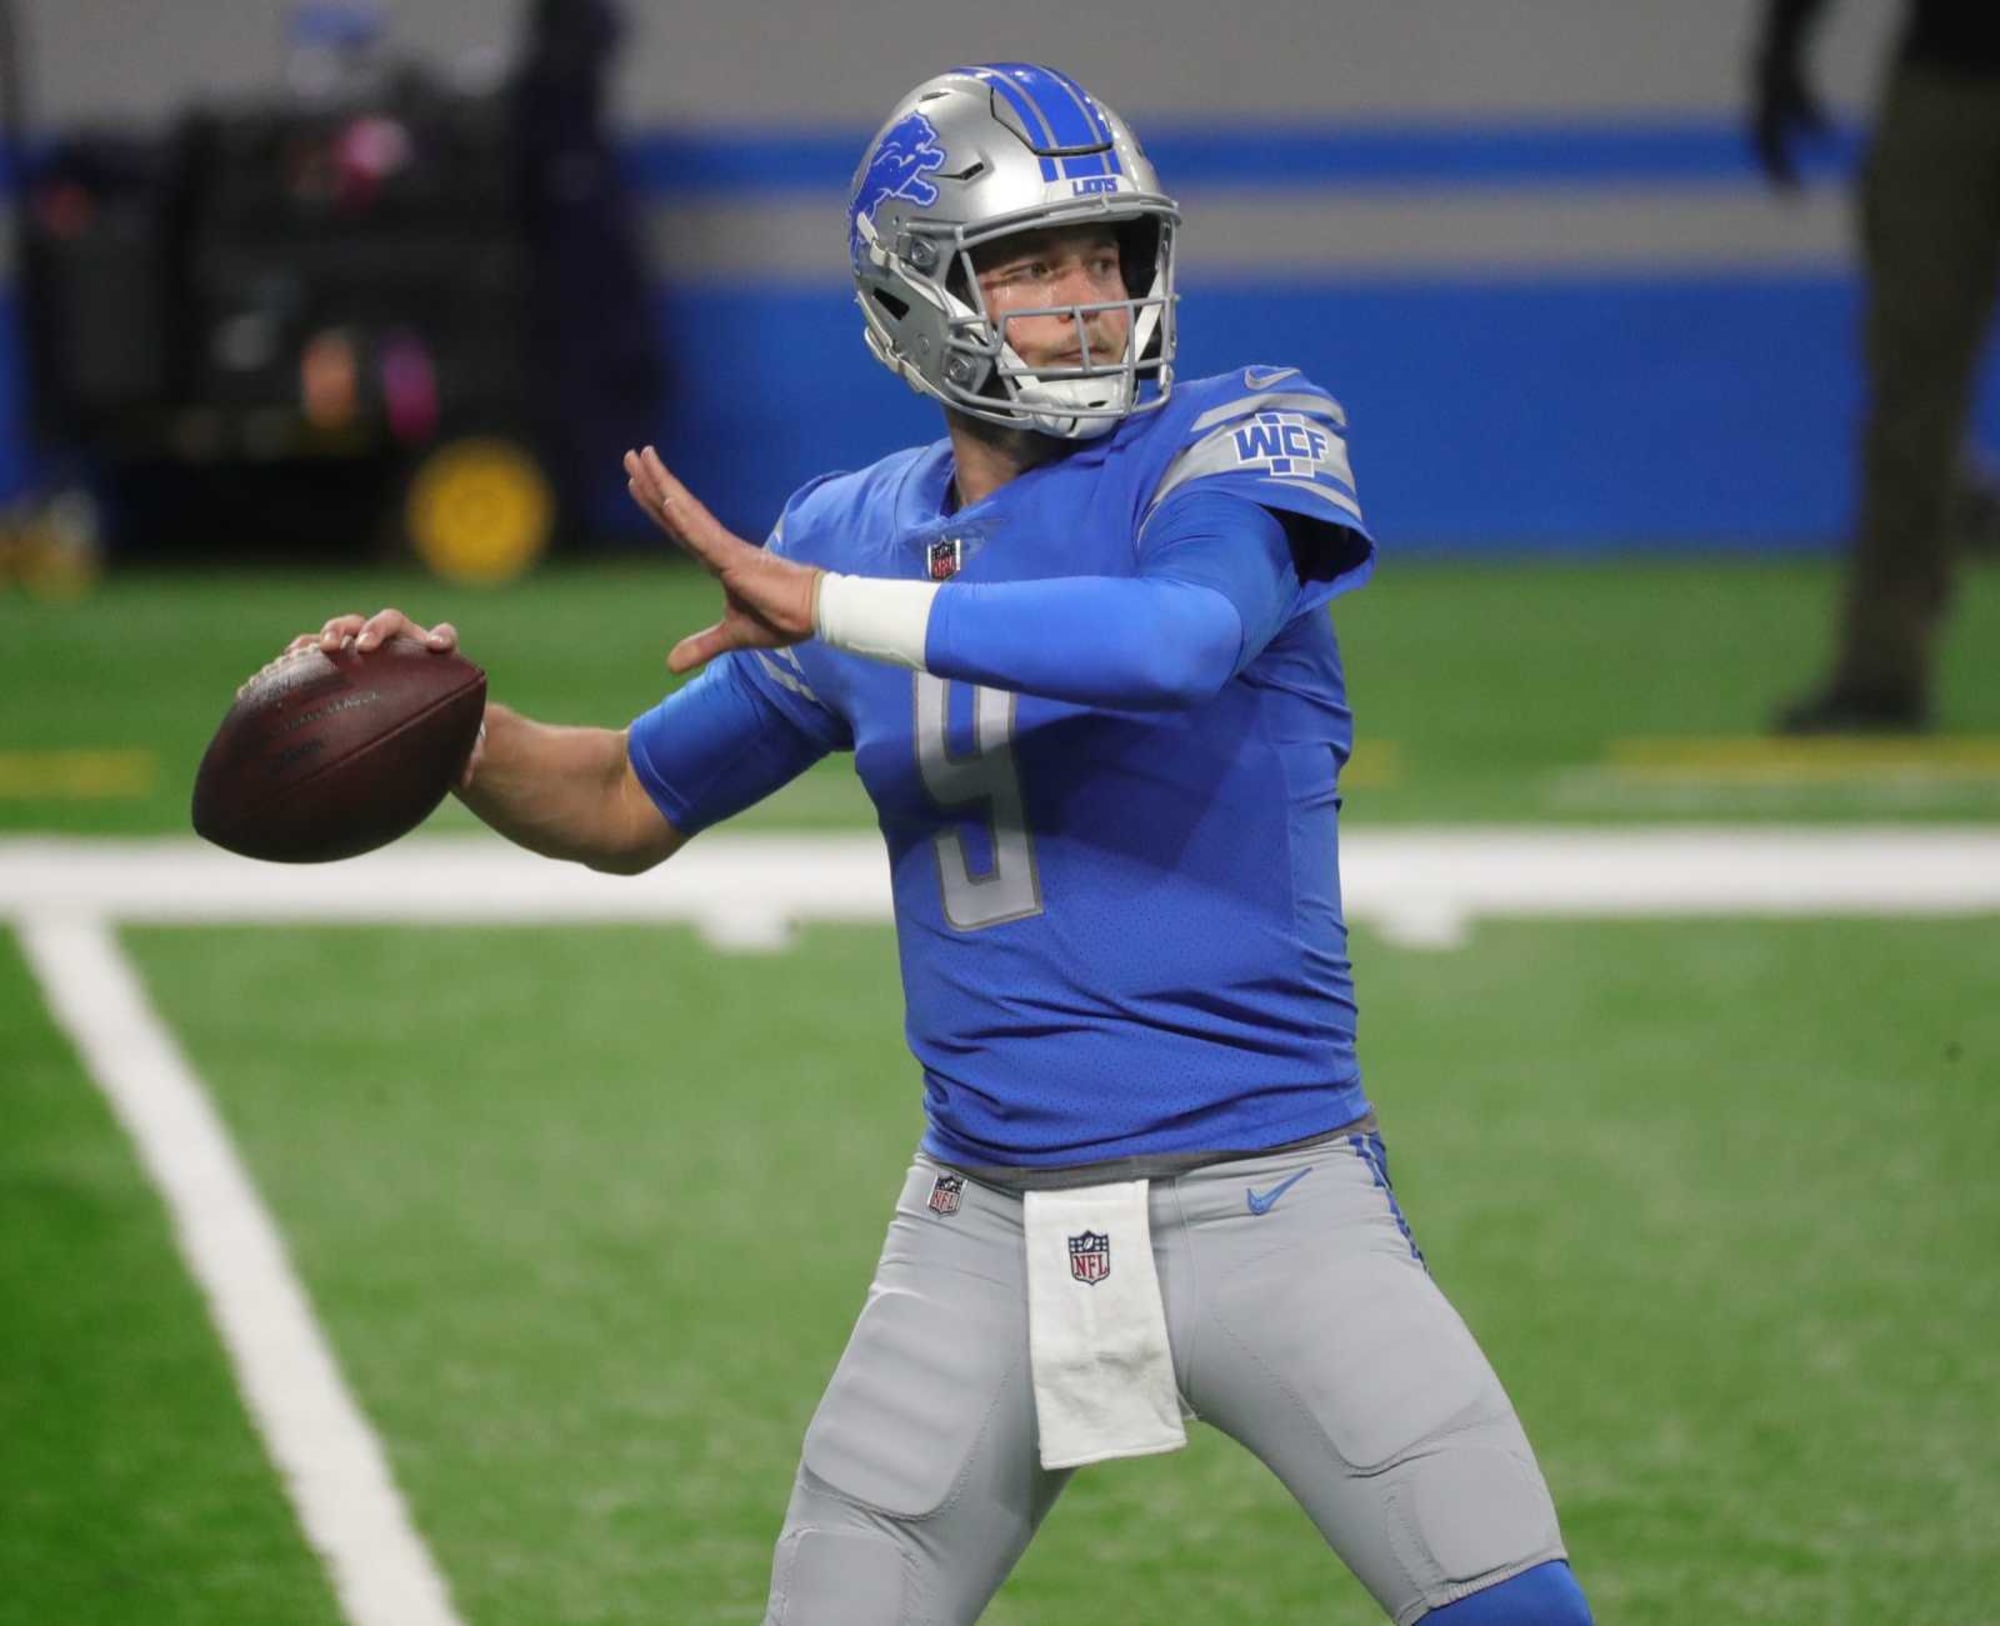 Former Georgia player Matthew Stafford traded from Detriot to LA